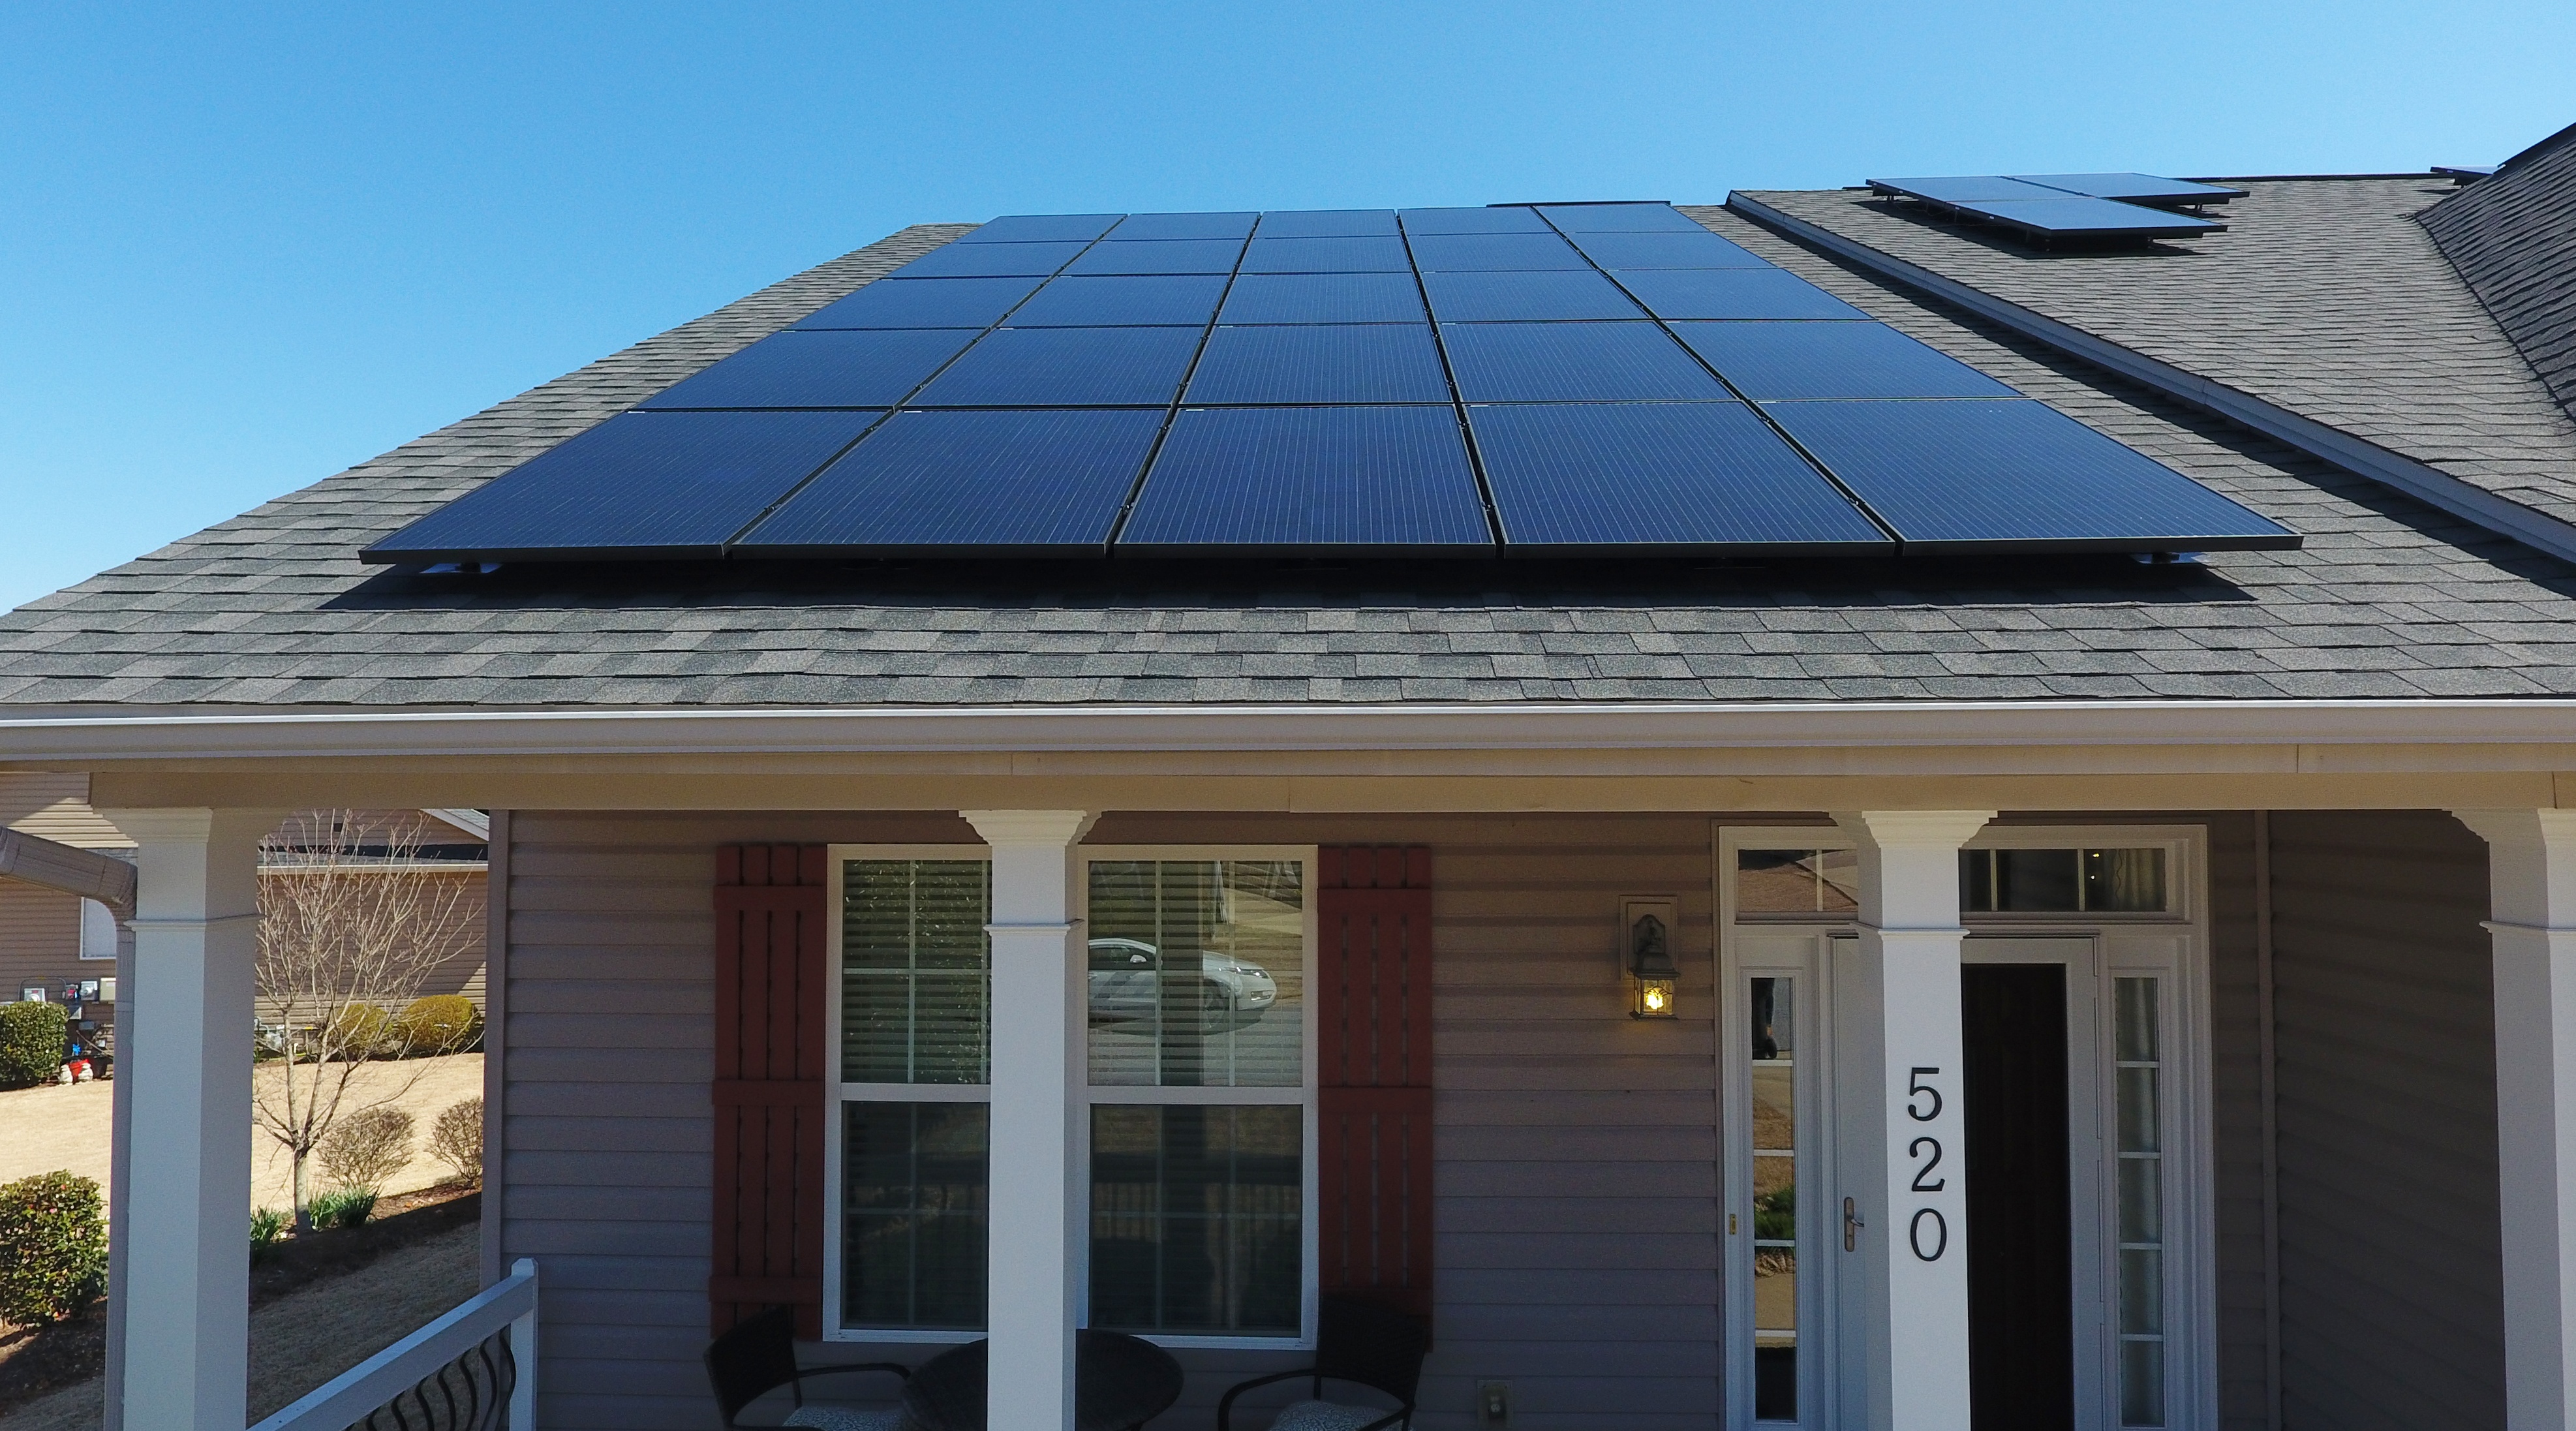 Choosing a Solar Panel Kit That’s Right for You